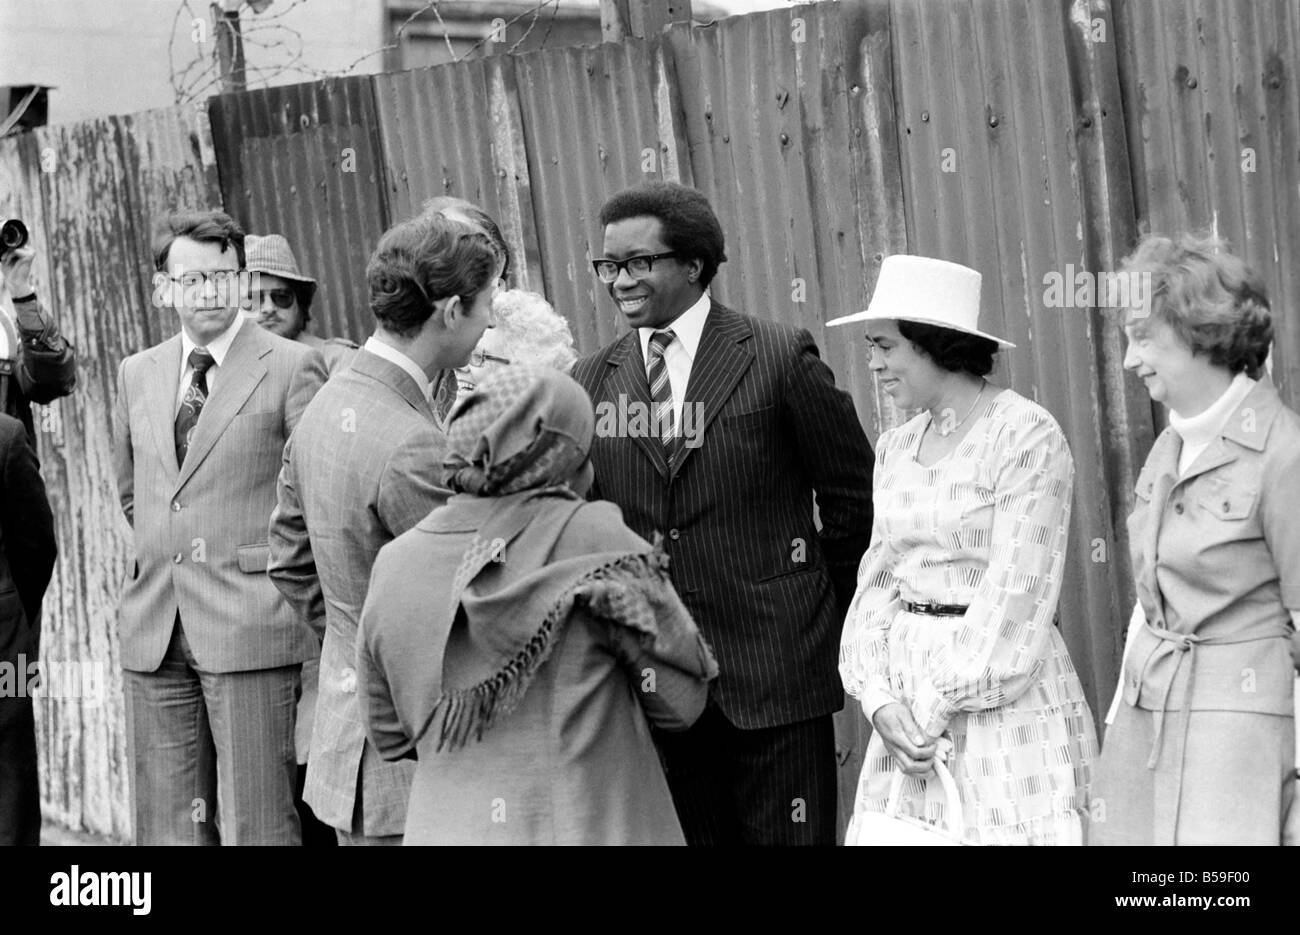 Prince Charles talking to Mr. Kim Gordon (wearing glasses and black jacket) the Secretary of the Defence Committee for the 24, during his visit to the Moonshot Youth Club, Lewisham, today. ;June 1977 ;R77-3374-002 Stock Photo